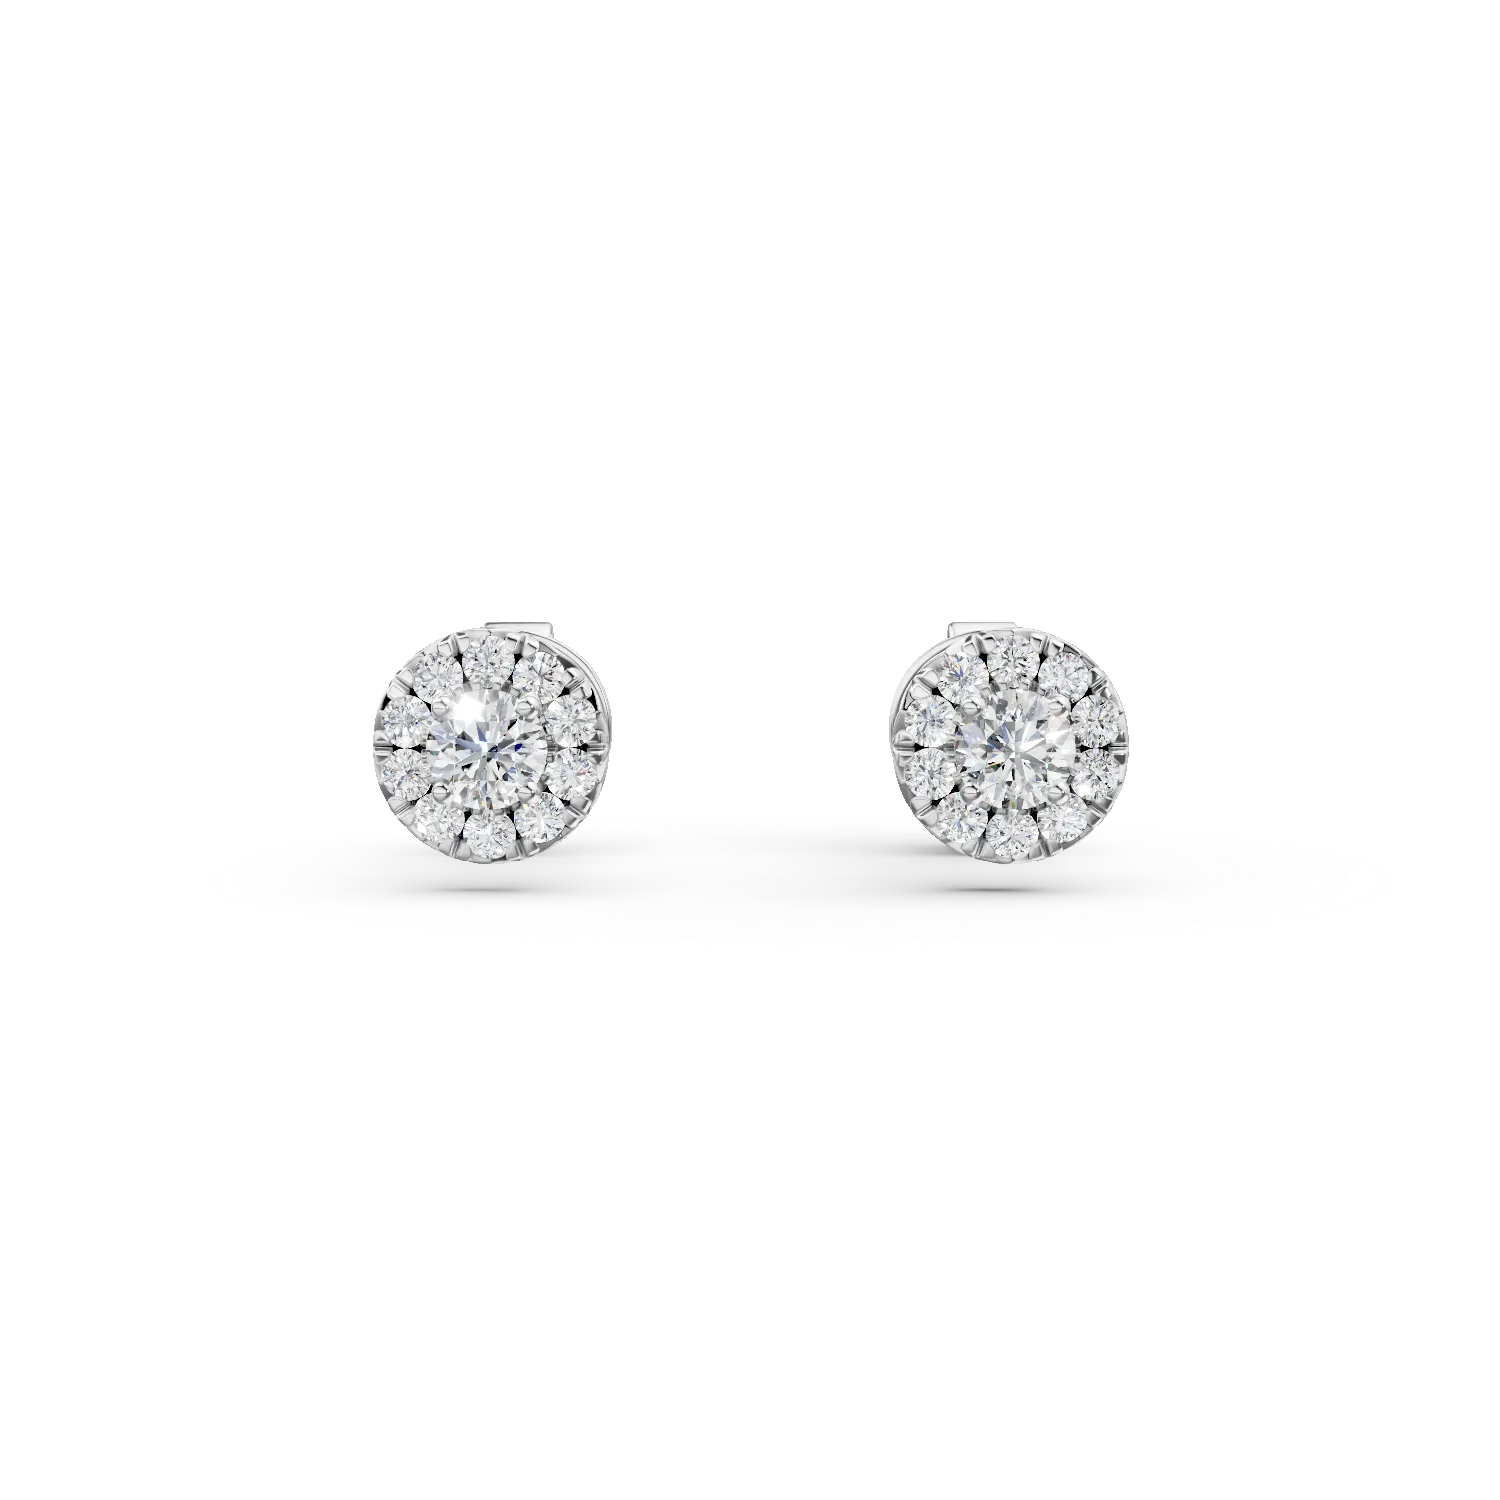 White gold Halo earrings with 0.5ct lab grown diamonds